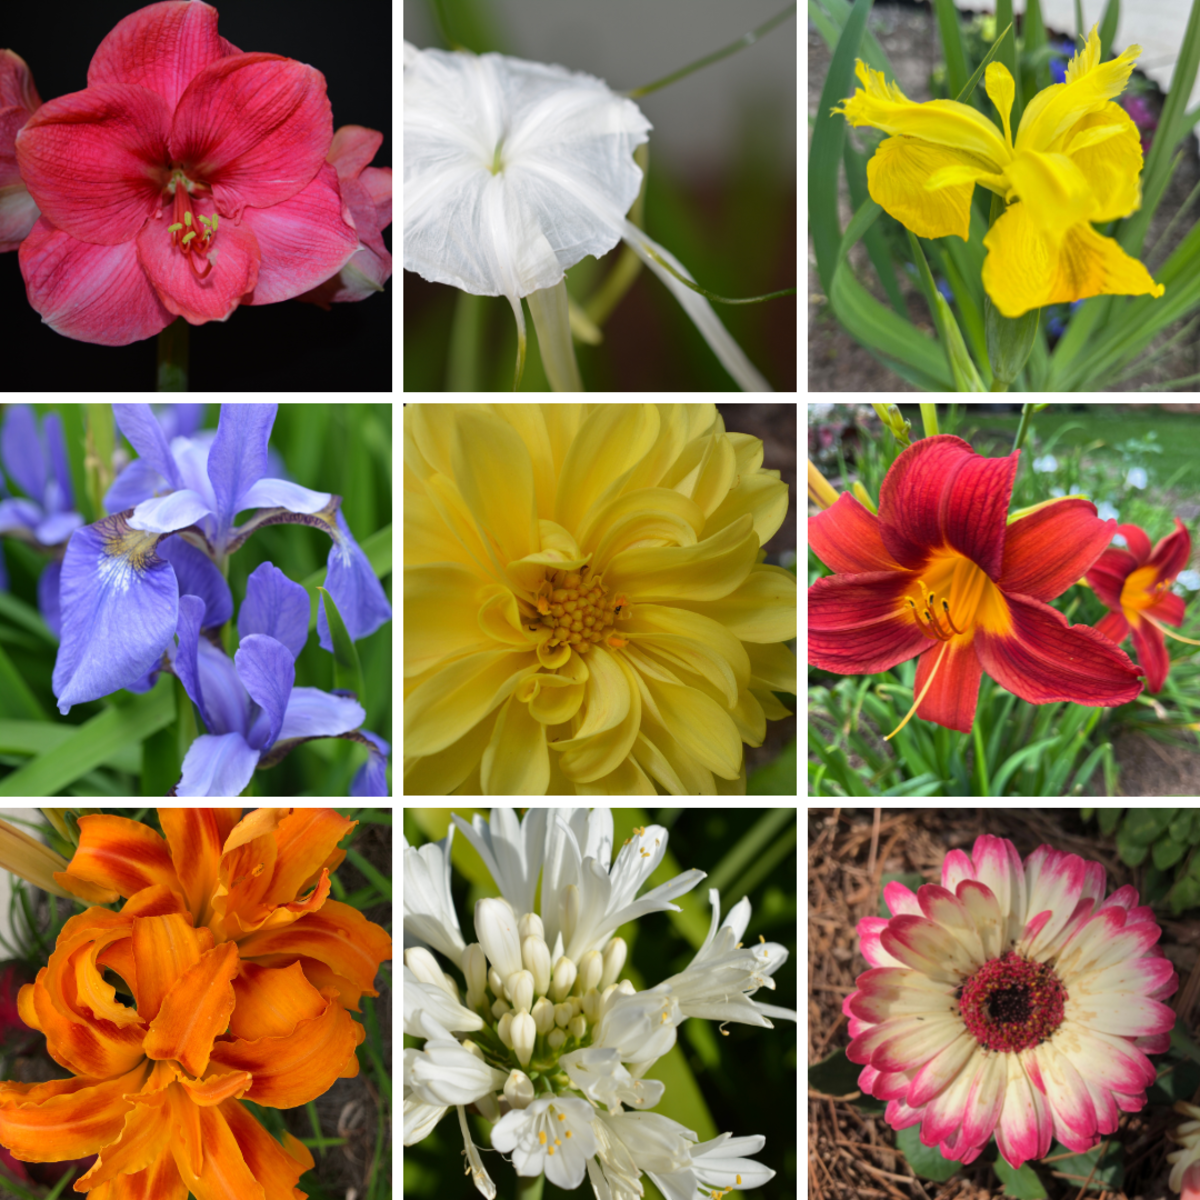 These are just a few of the many sun-loving perennial flowers to create beauty in our gardens.